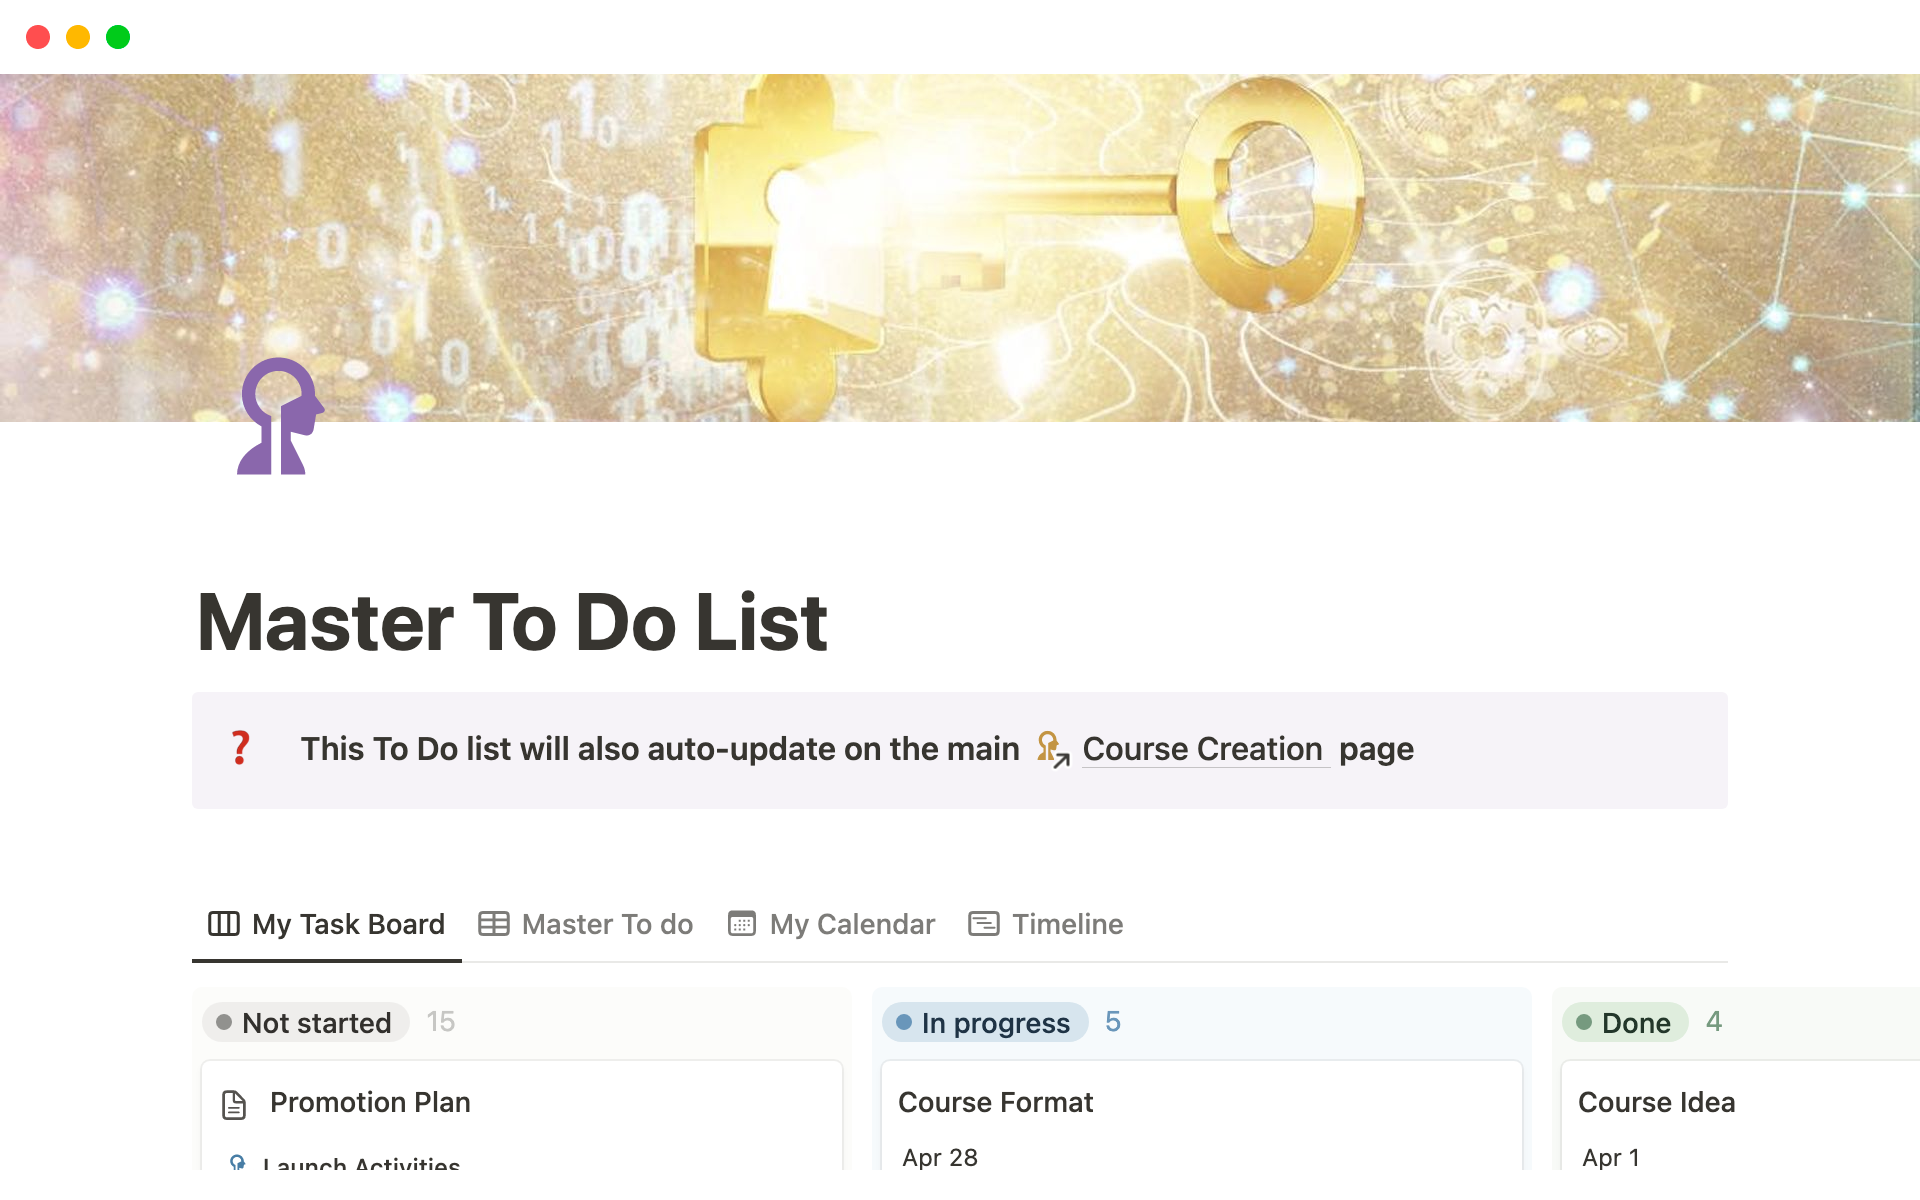 Helps users create & manage course creation from start to finish.